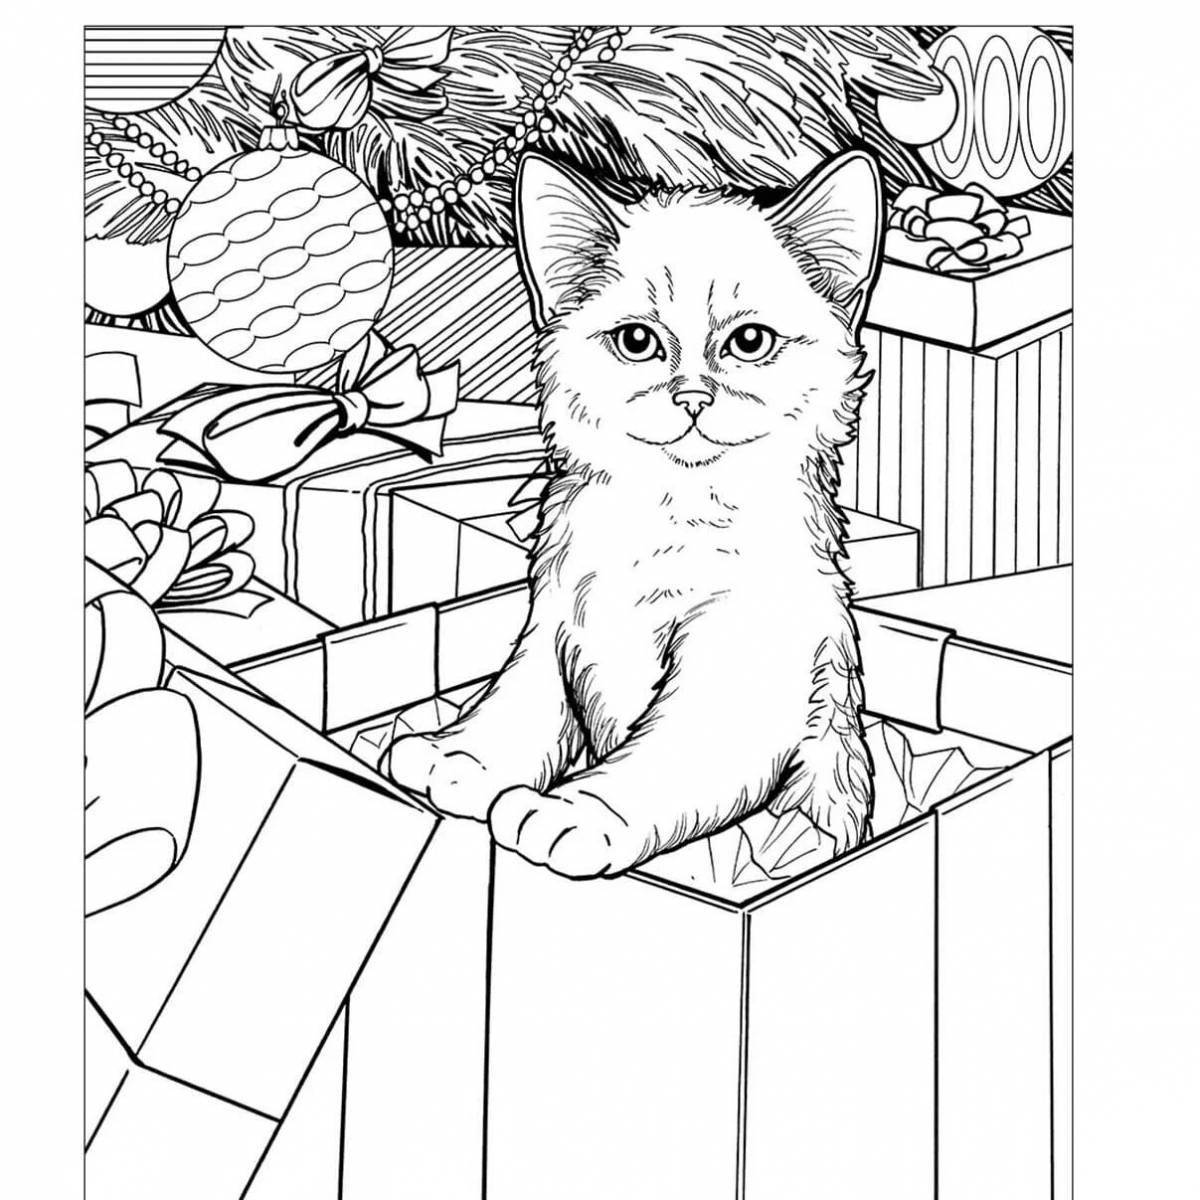 Adorable Christmas cat coloring book